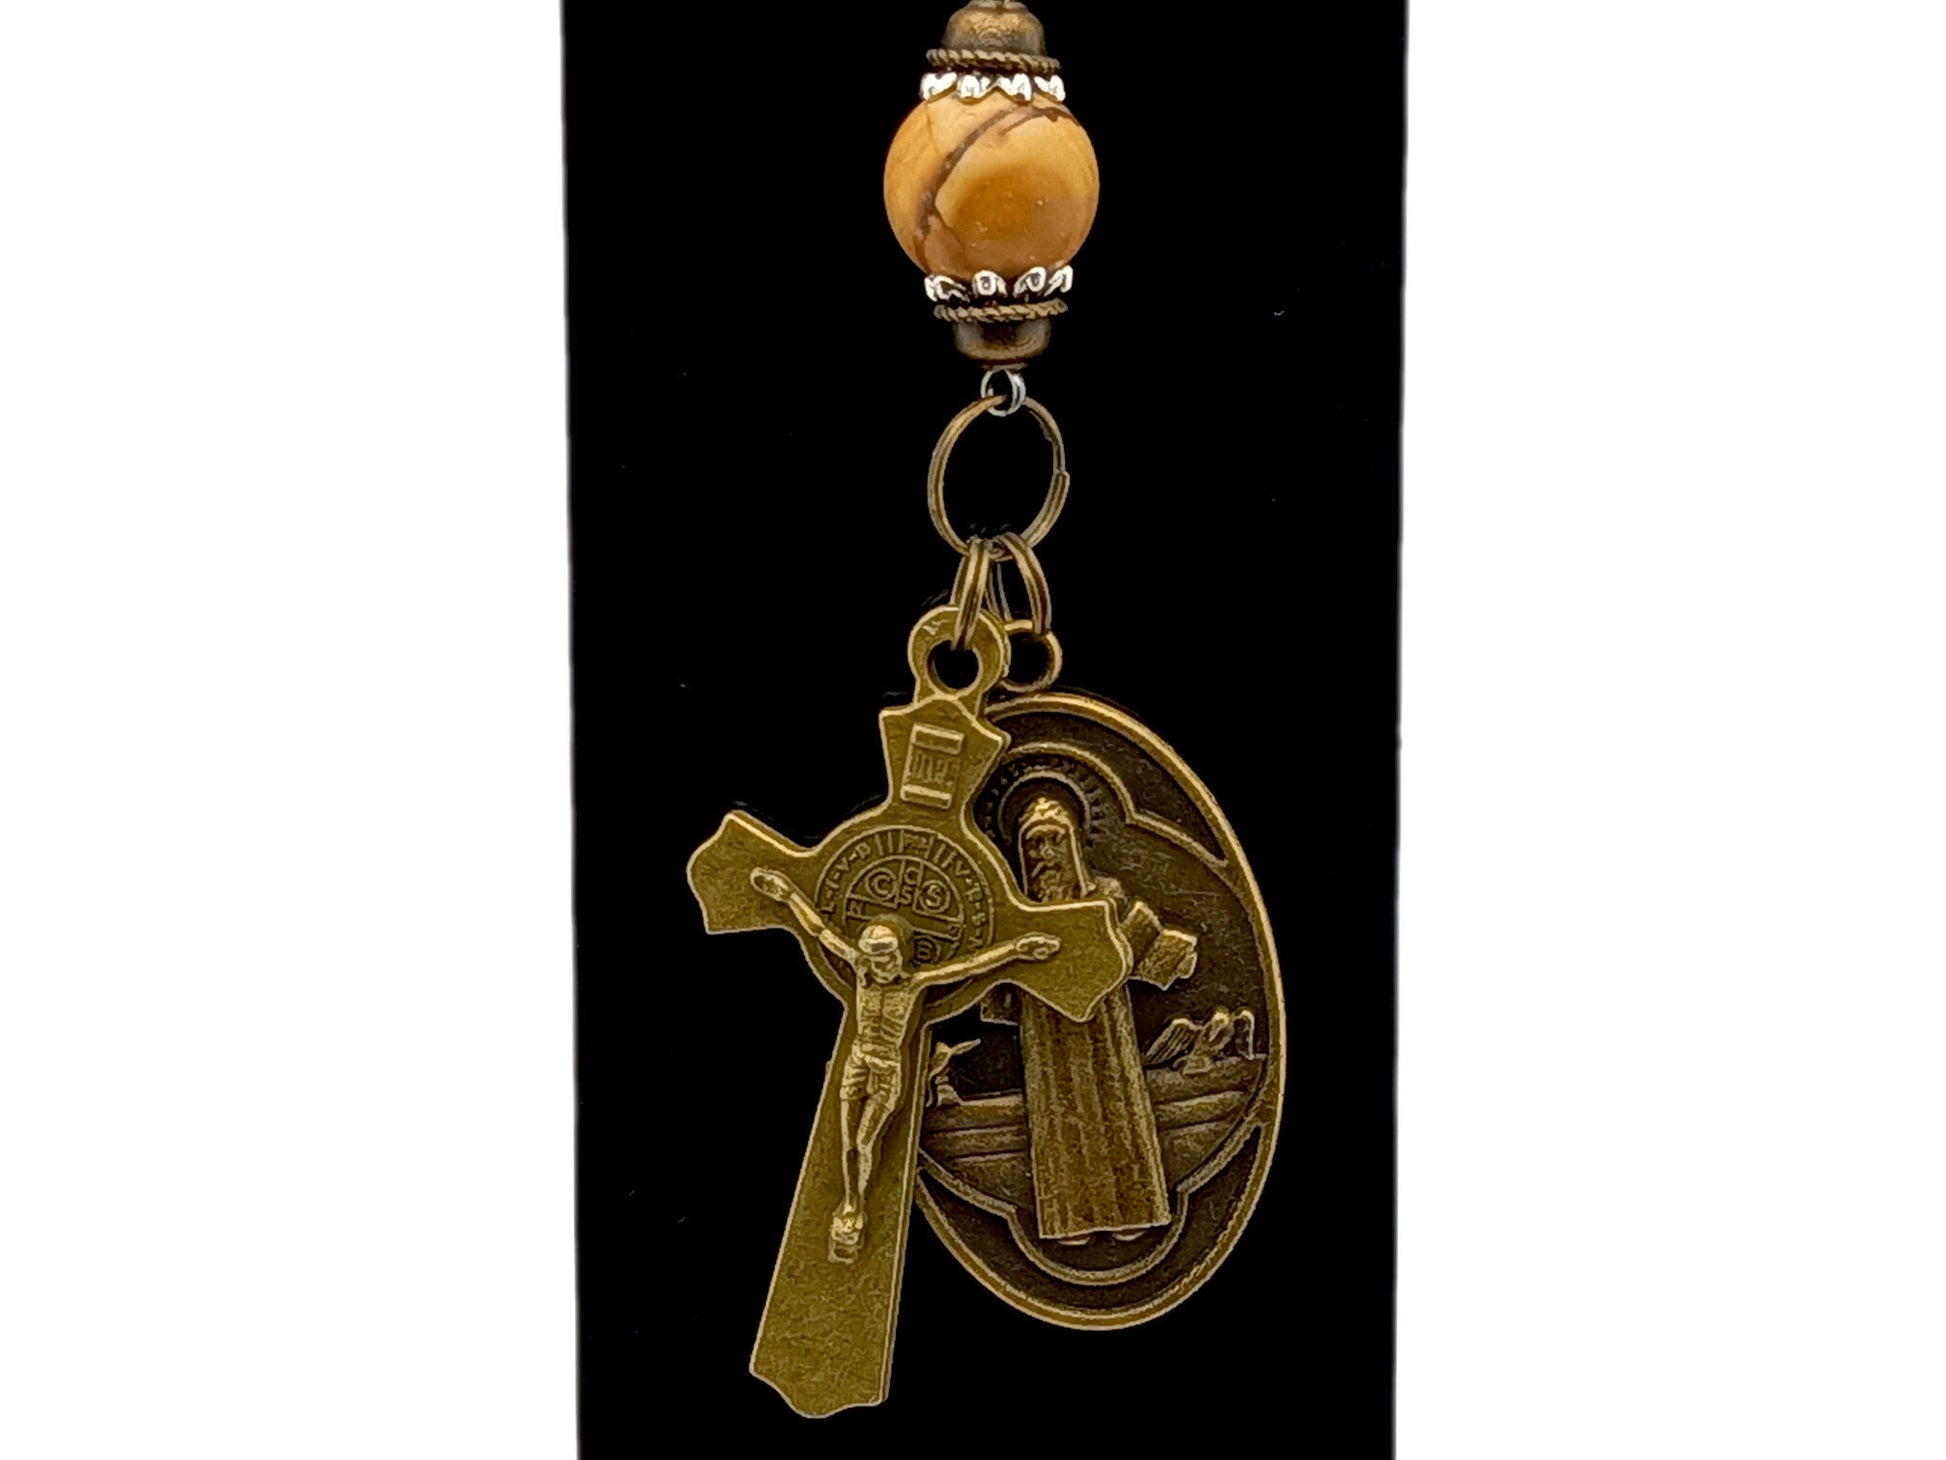 Vintage Saint Benedict medal and crucifix unique rosary beads purse clip key chain with sandwood gemstone bead.